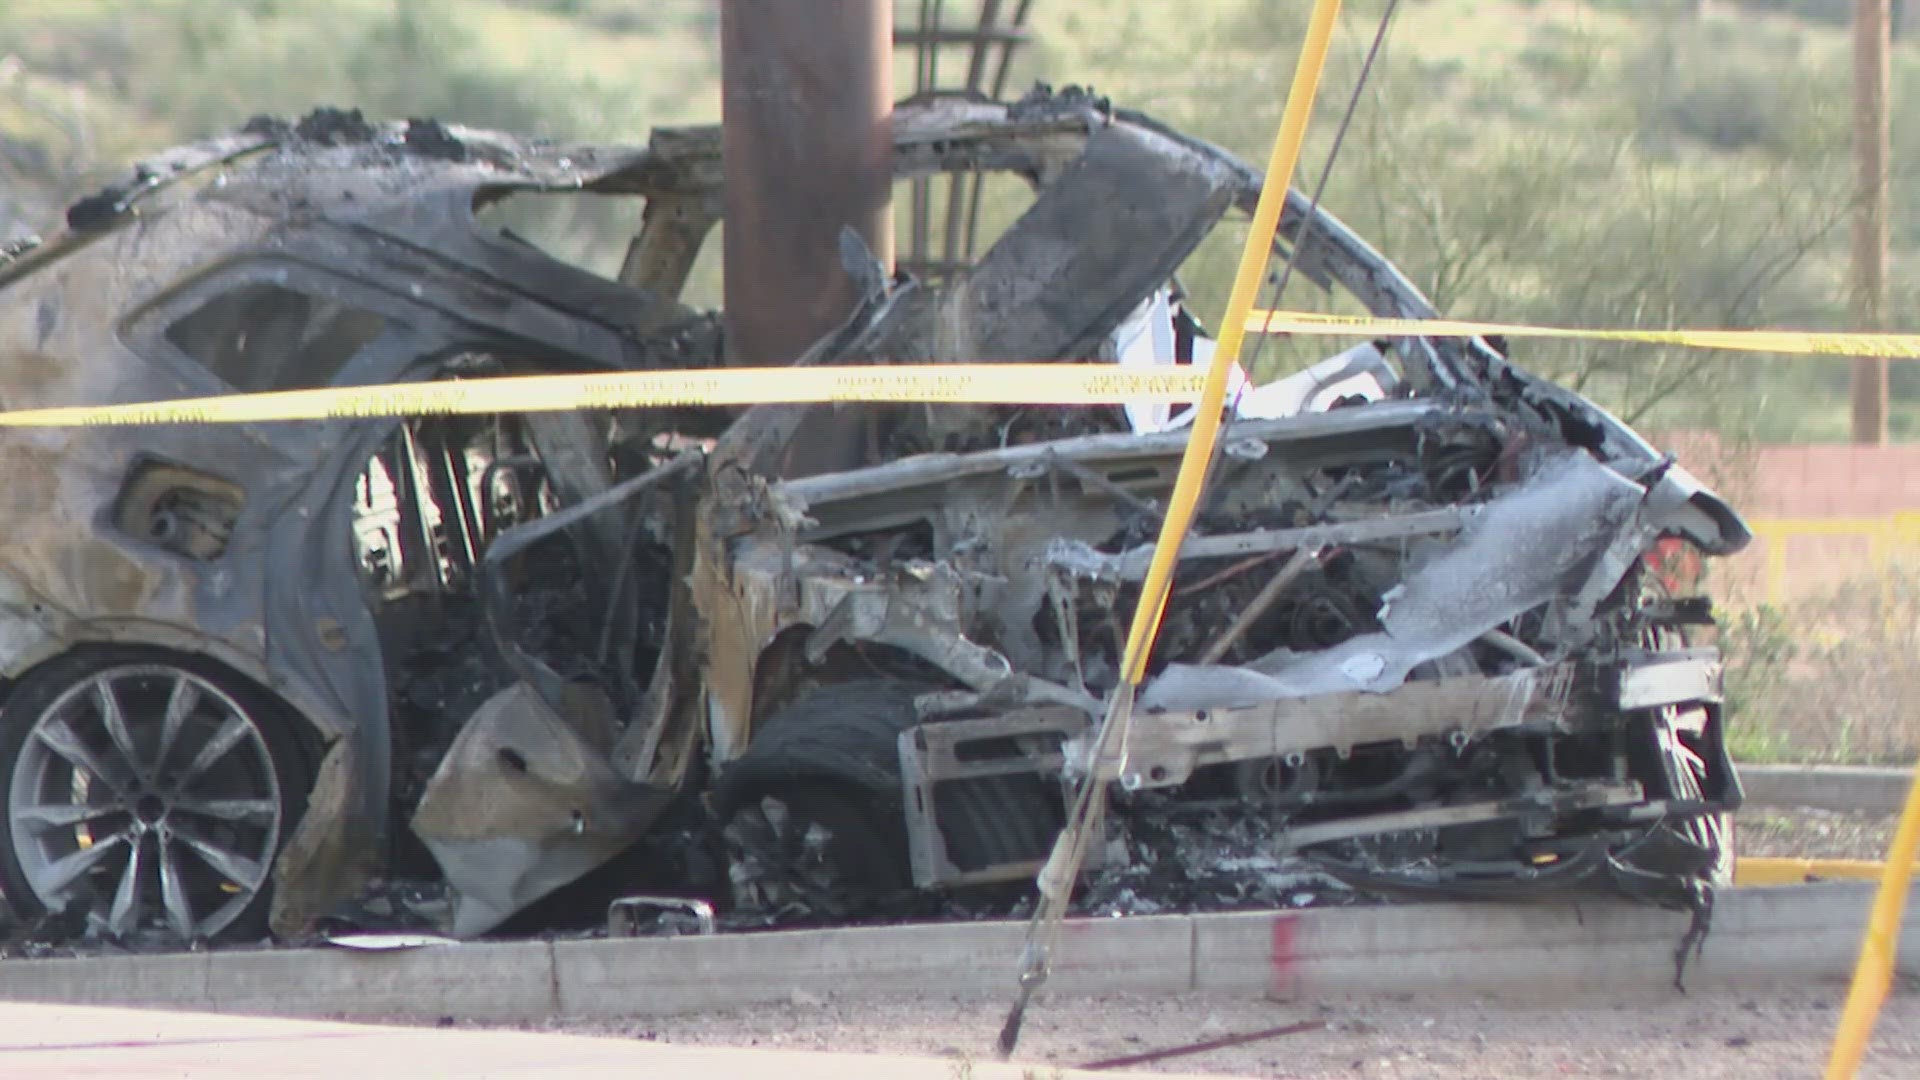 1 person was killed and two others were hurt after a crash that caused one of the cars to catch fire on Saturday. Watch the video for the latest details.